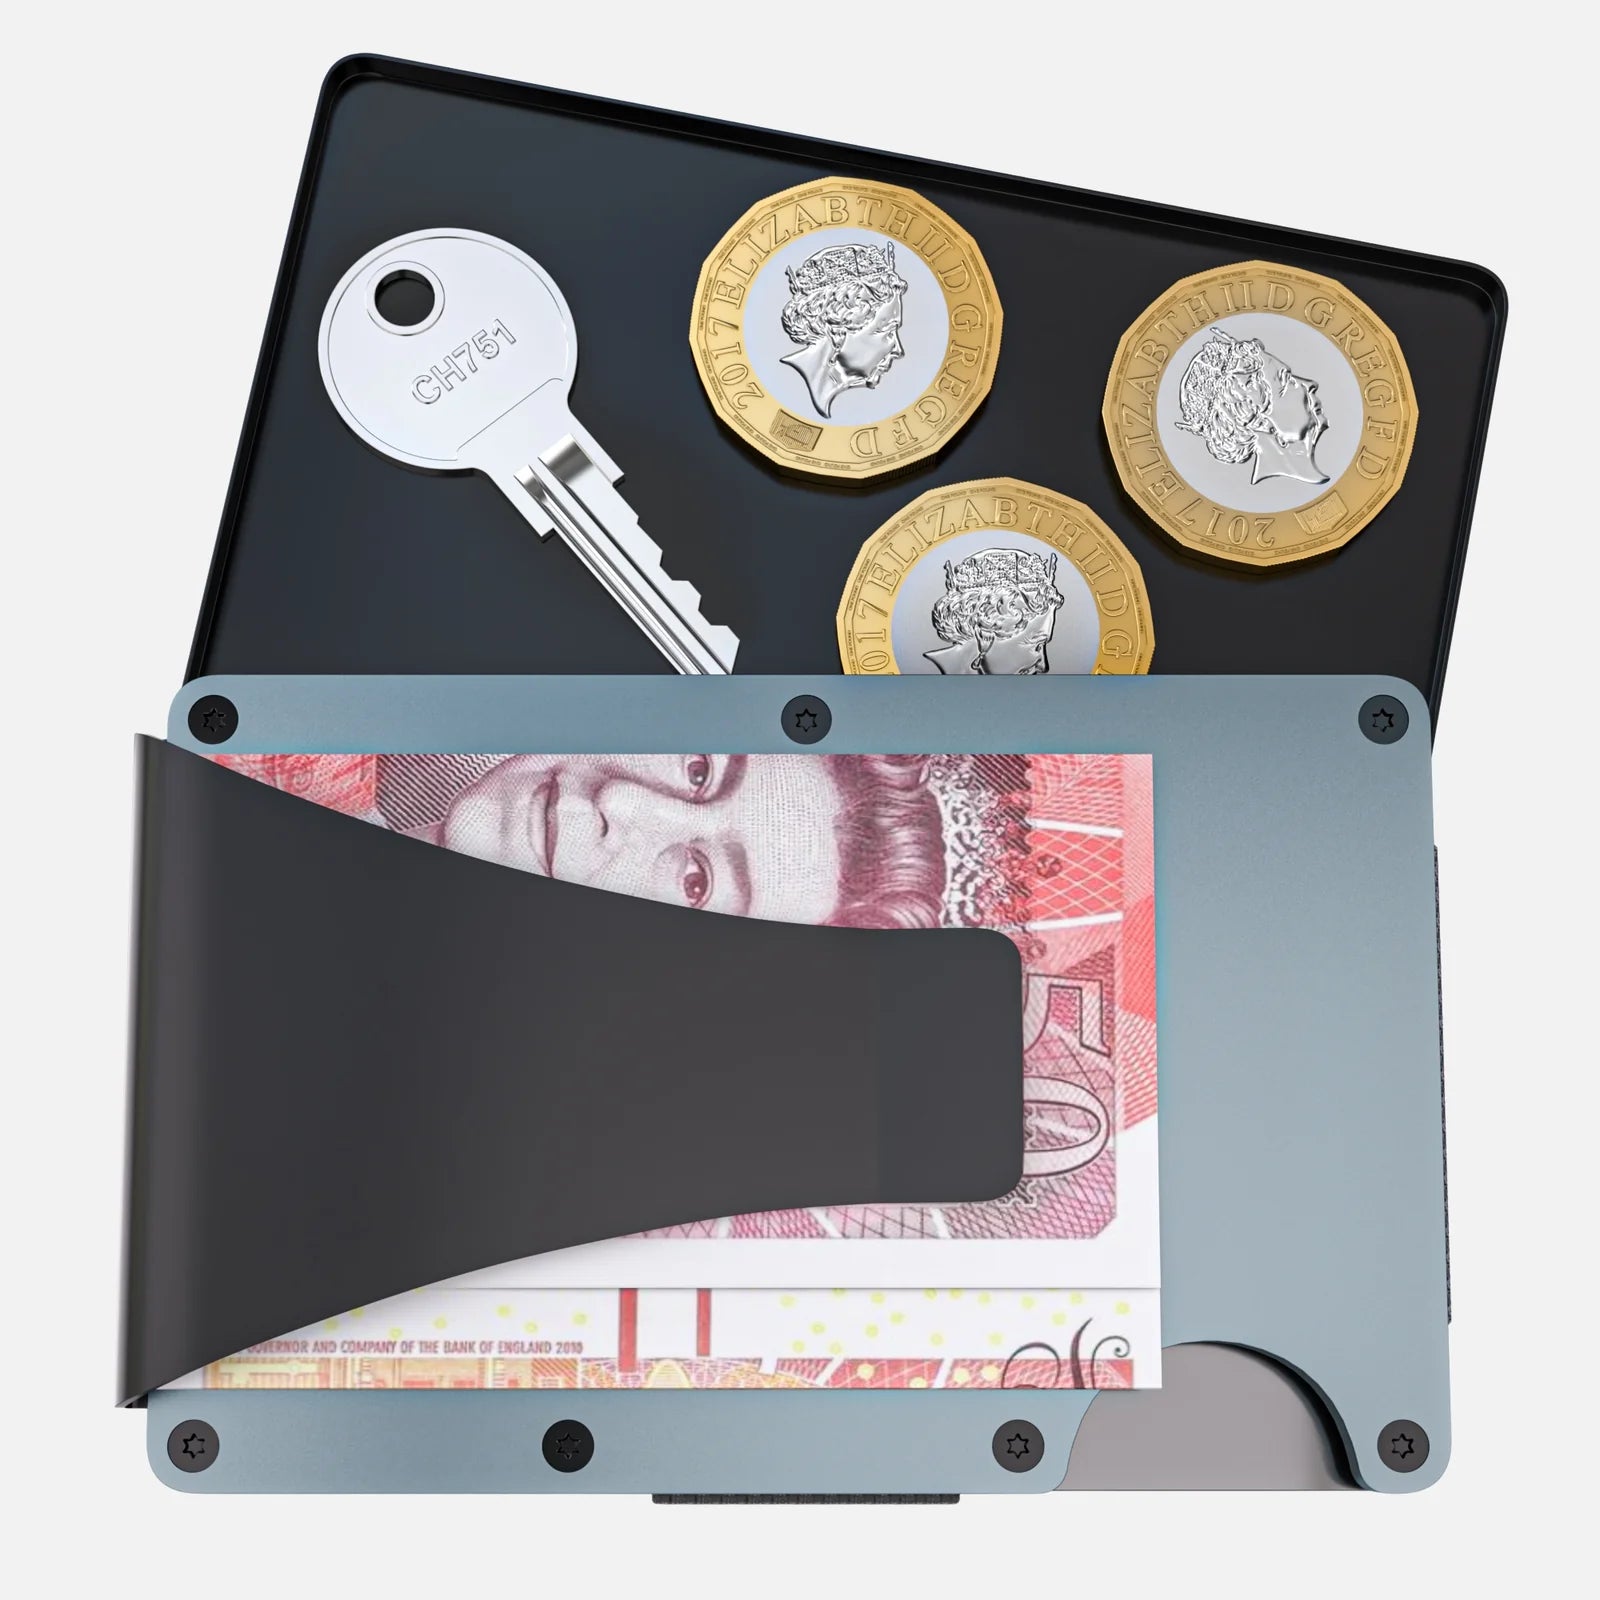 Sleek Aluminum Alloy Wallet: Secure Storage for Cards, Keys, and Coins